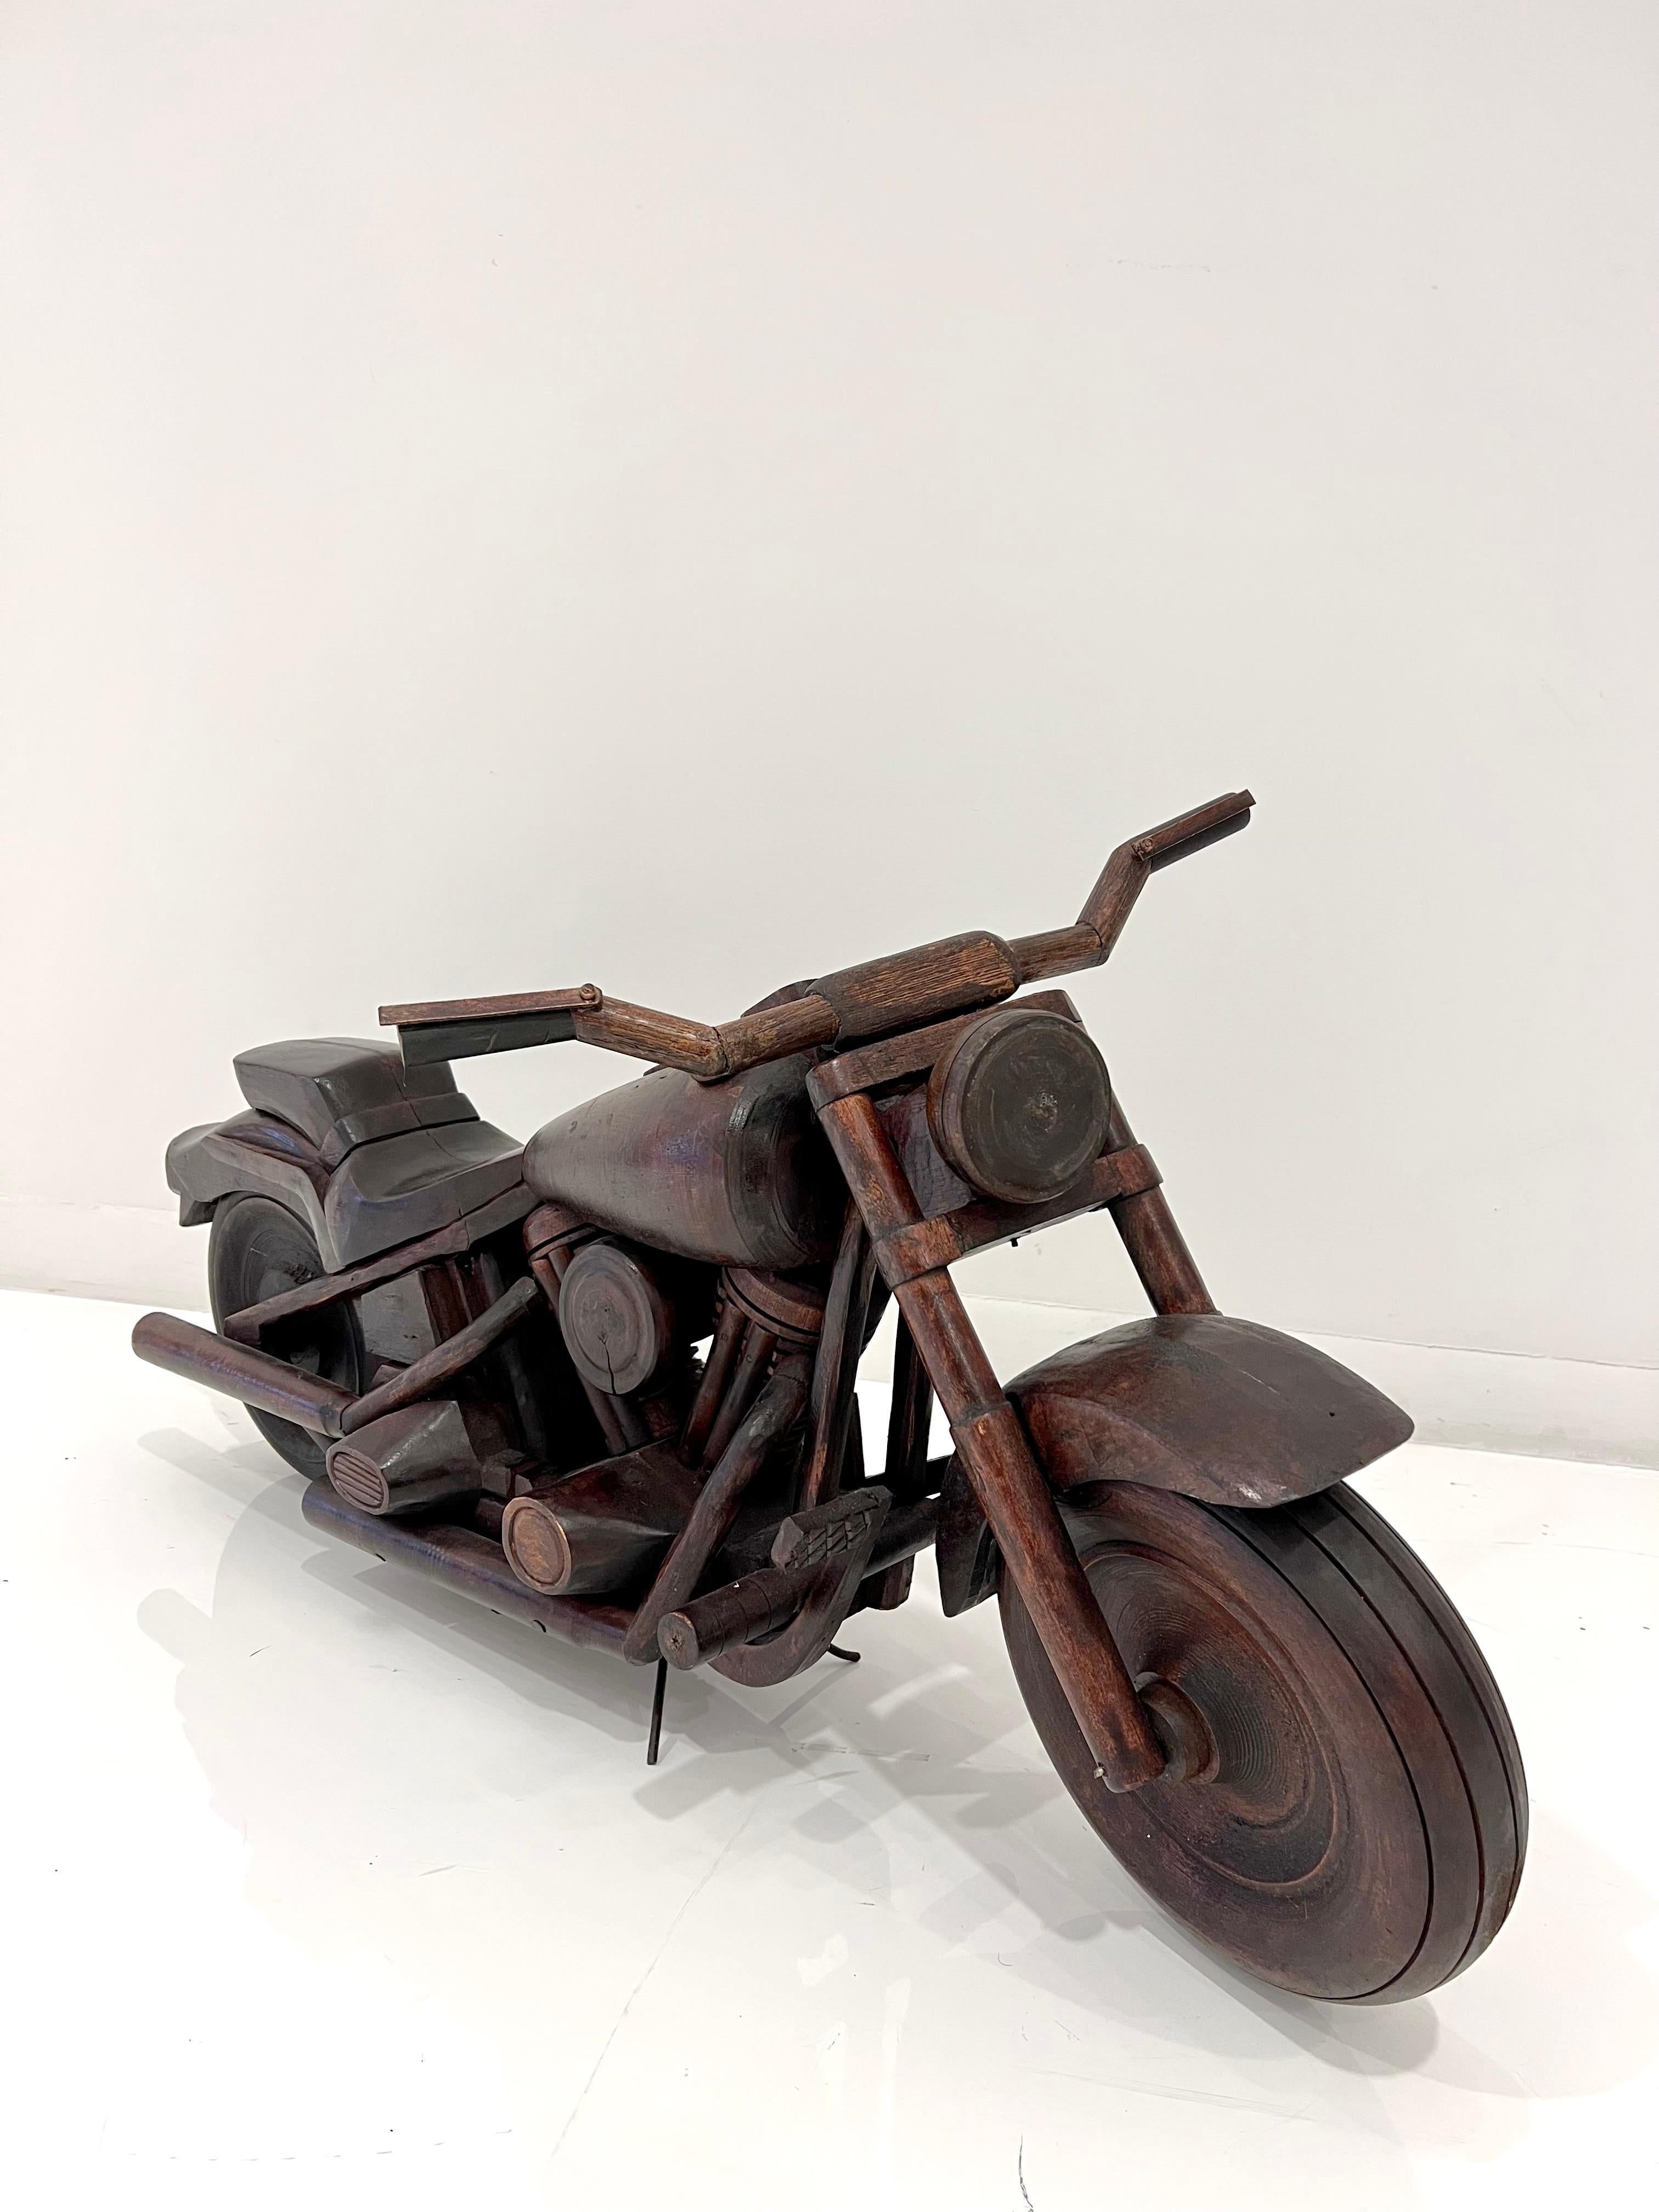 Unique motorcycle model with moving parts, fully constructed in wood. New Hampshire, circa 1950's.